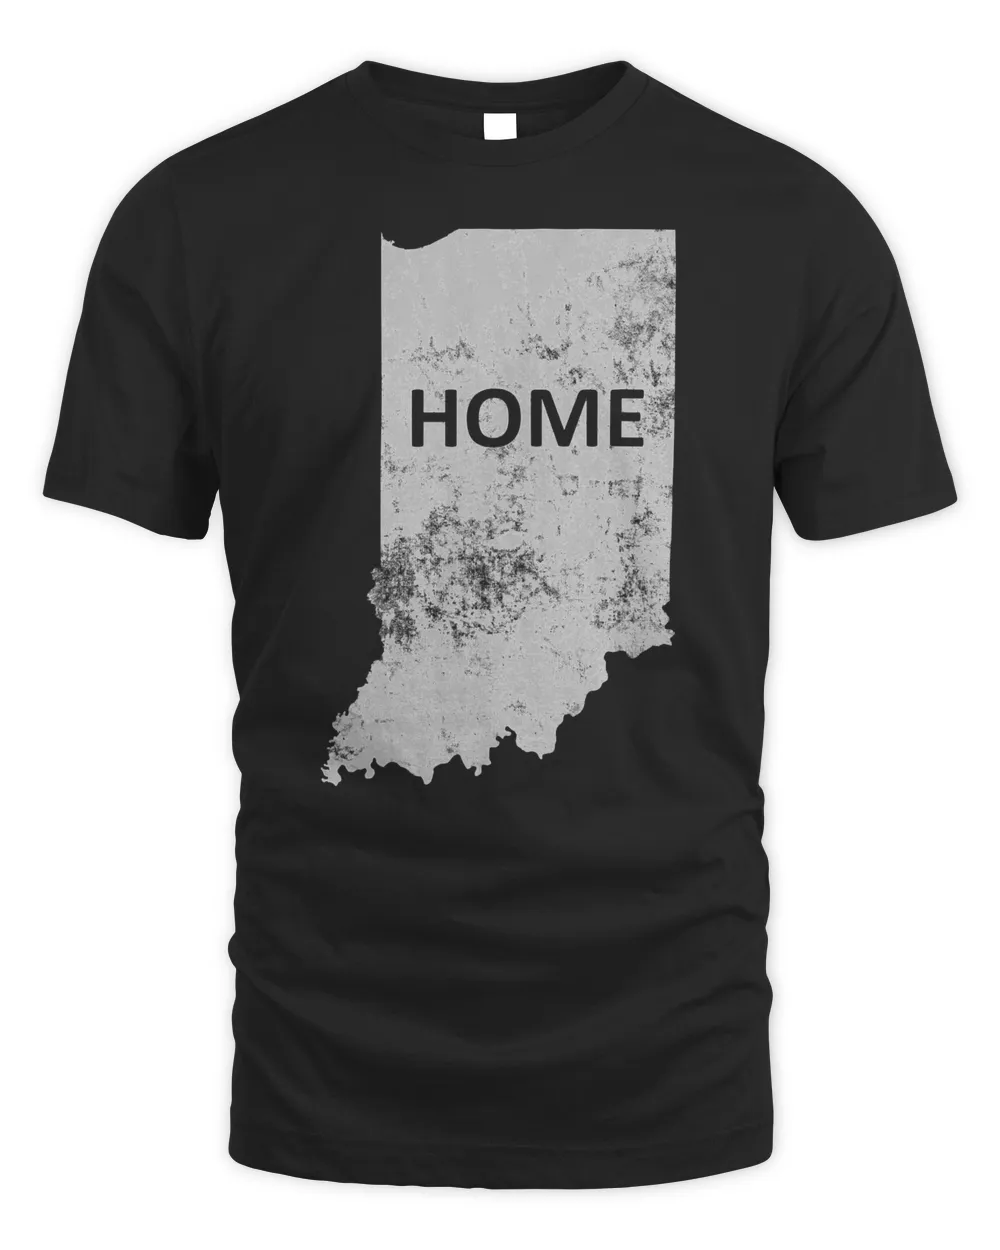 Home - Indiana T-Shirt